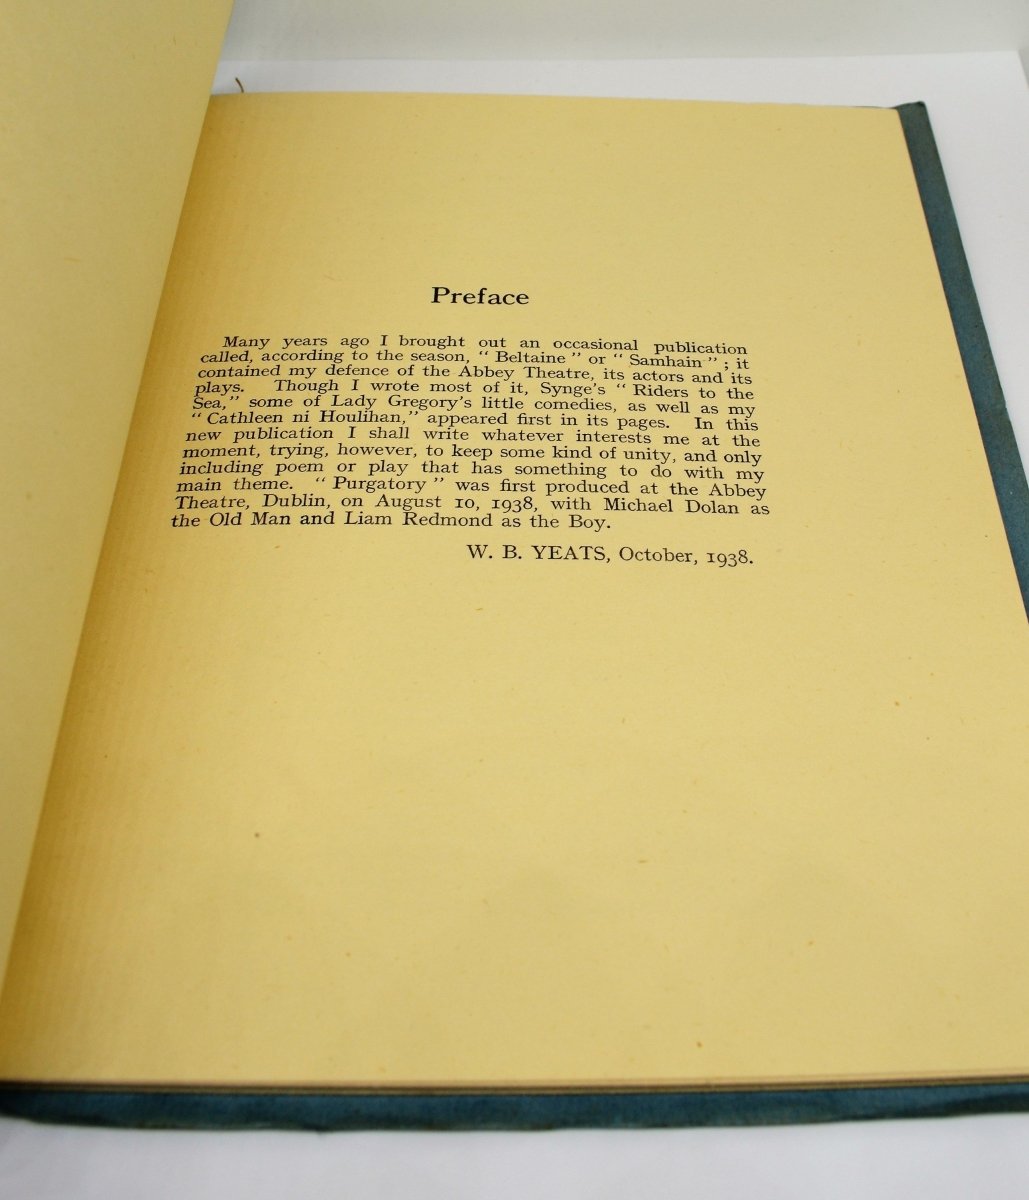 Yeats, W B - On the Boiler ( W B Yeats' son's copy ) | image6